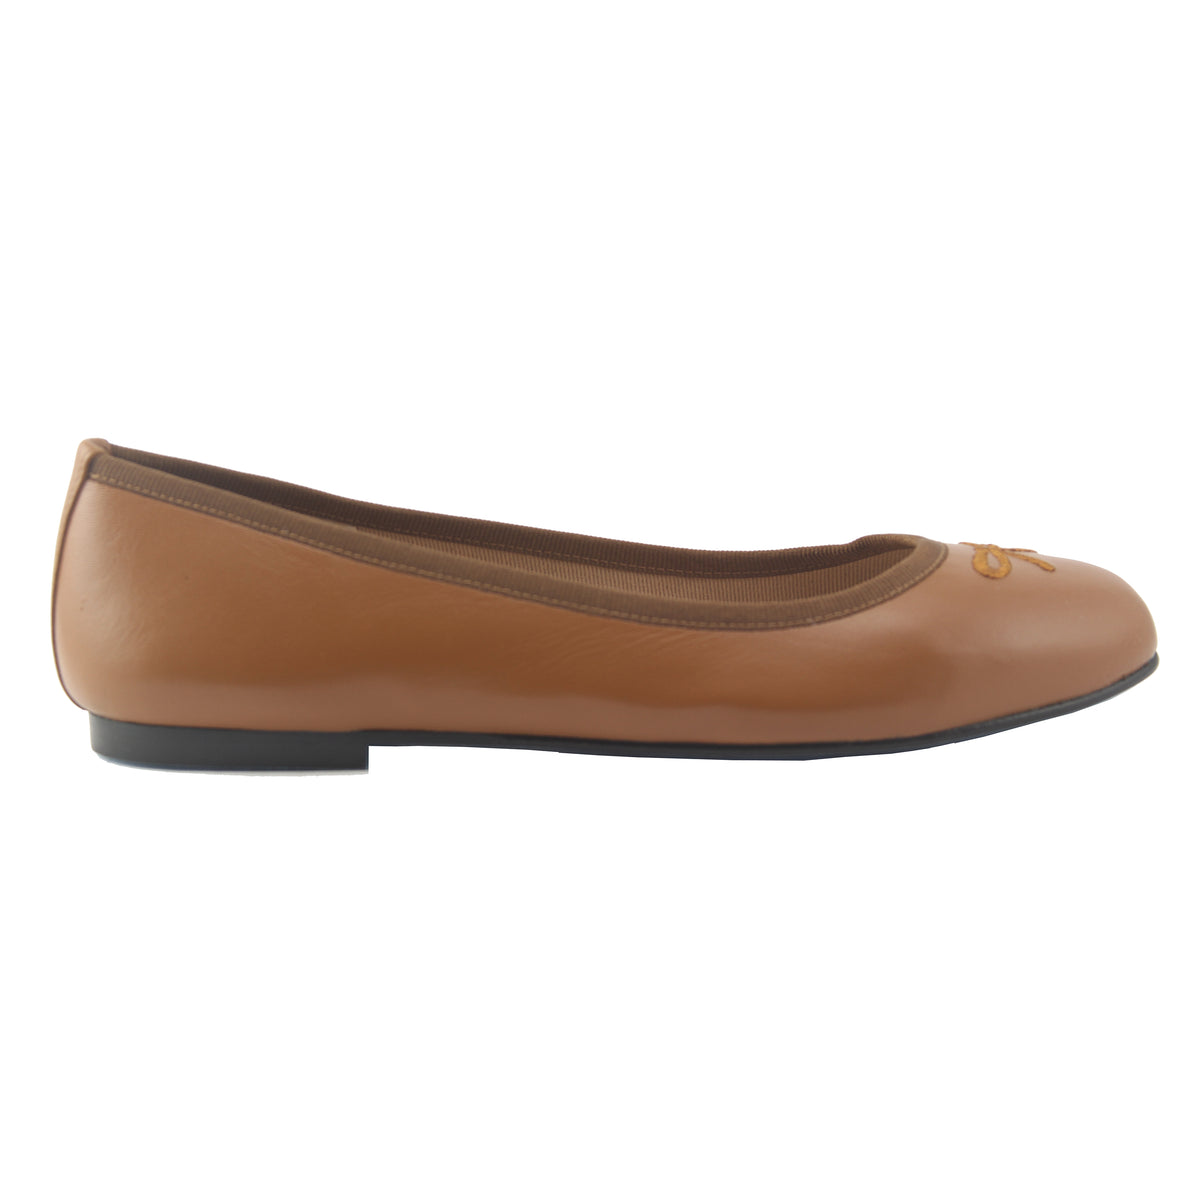 Kathy - Praline Leather – French Sole